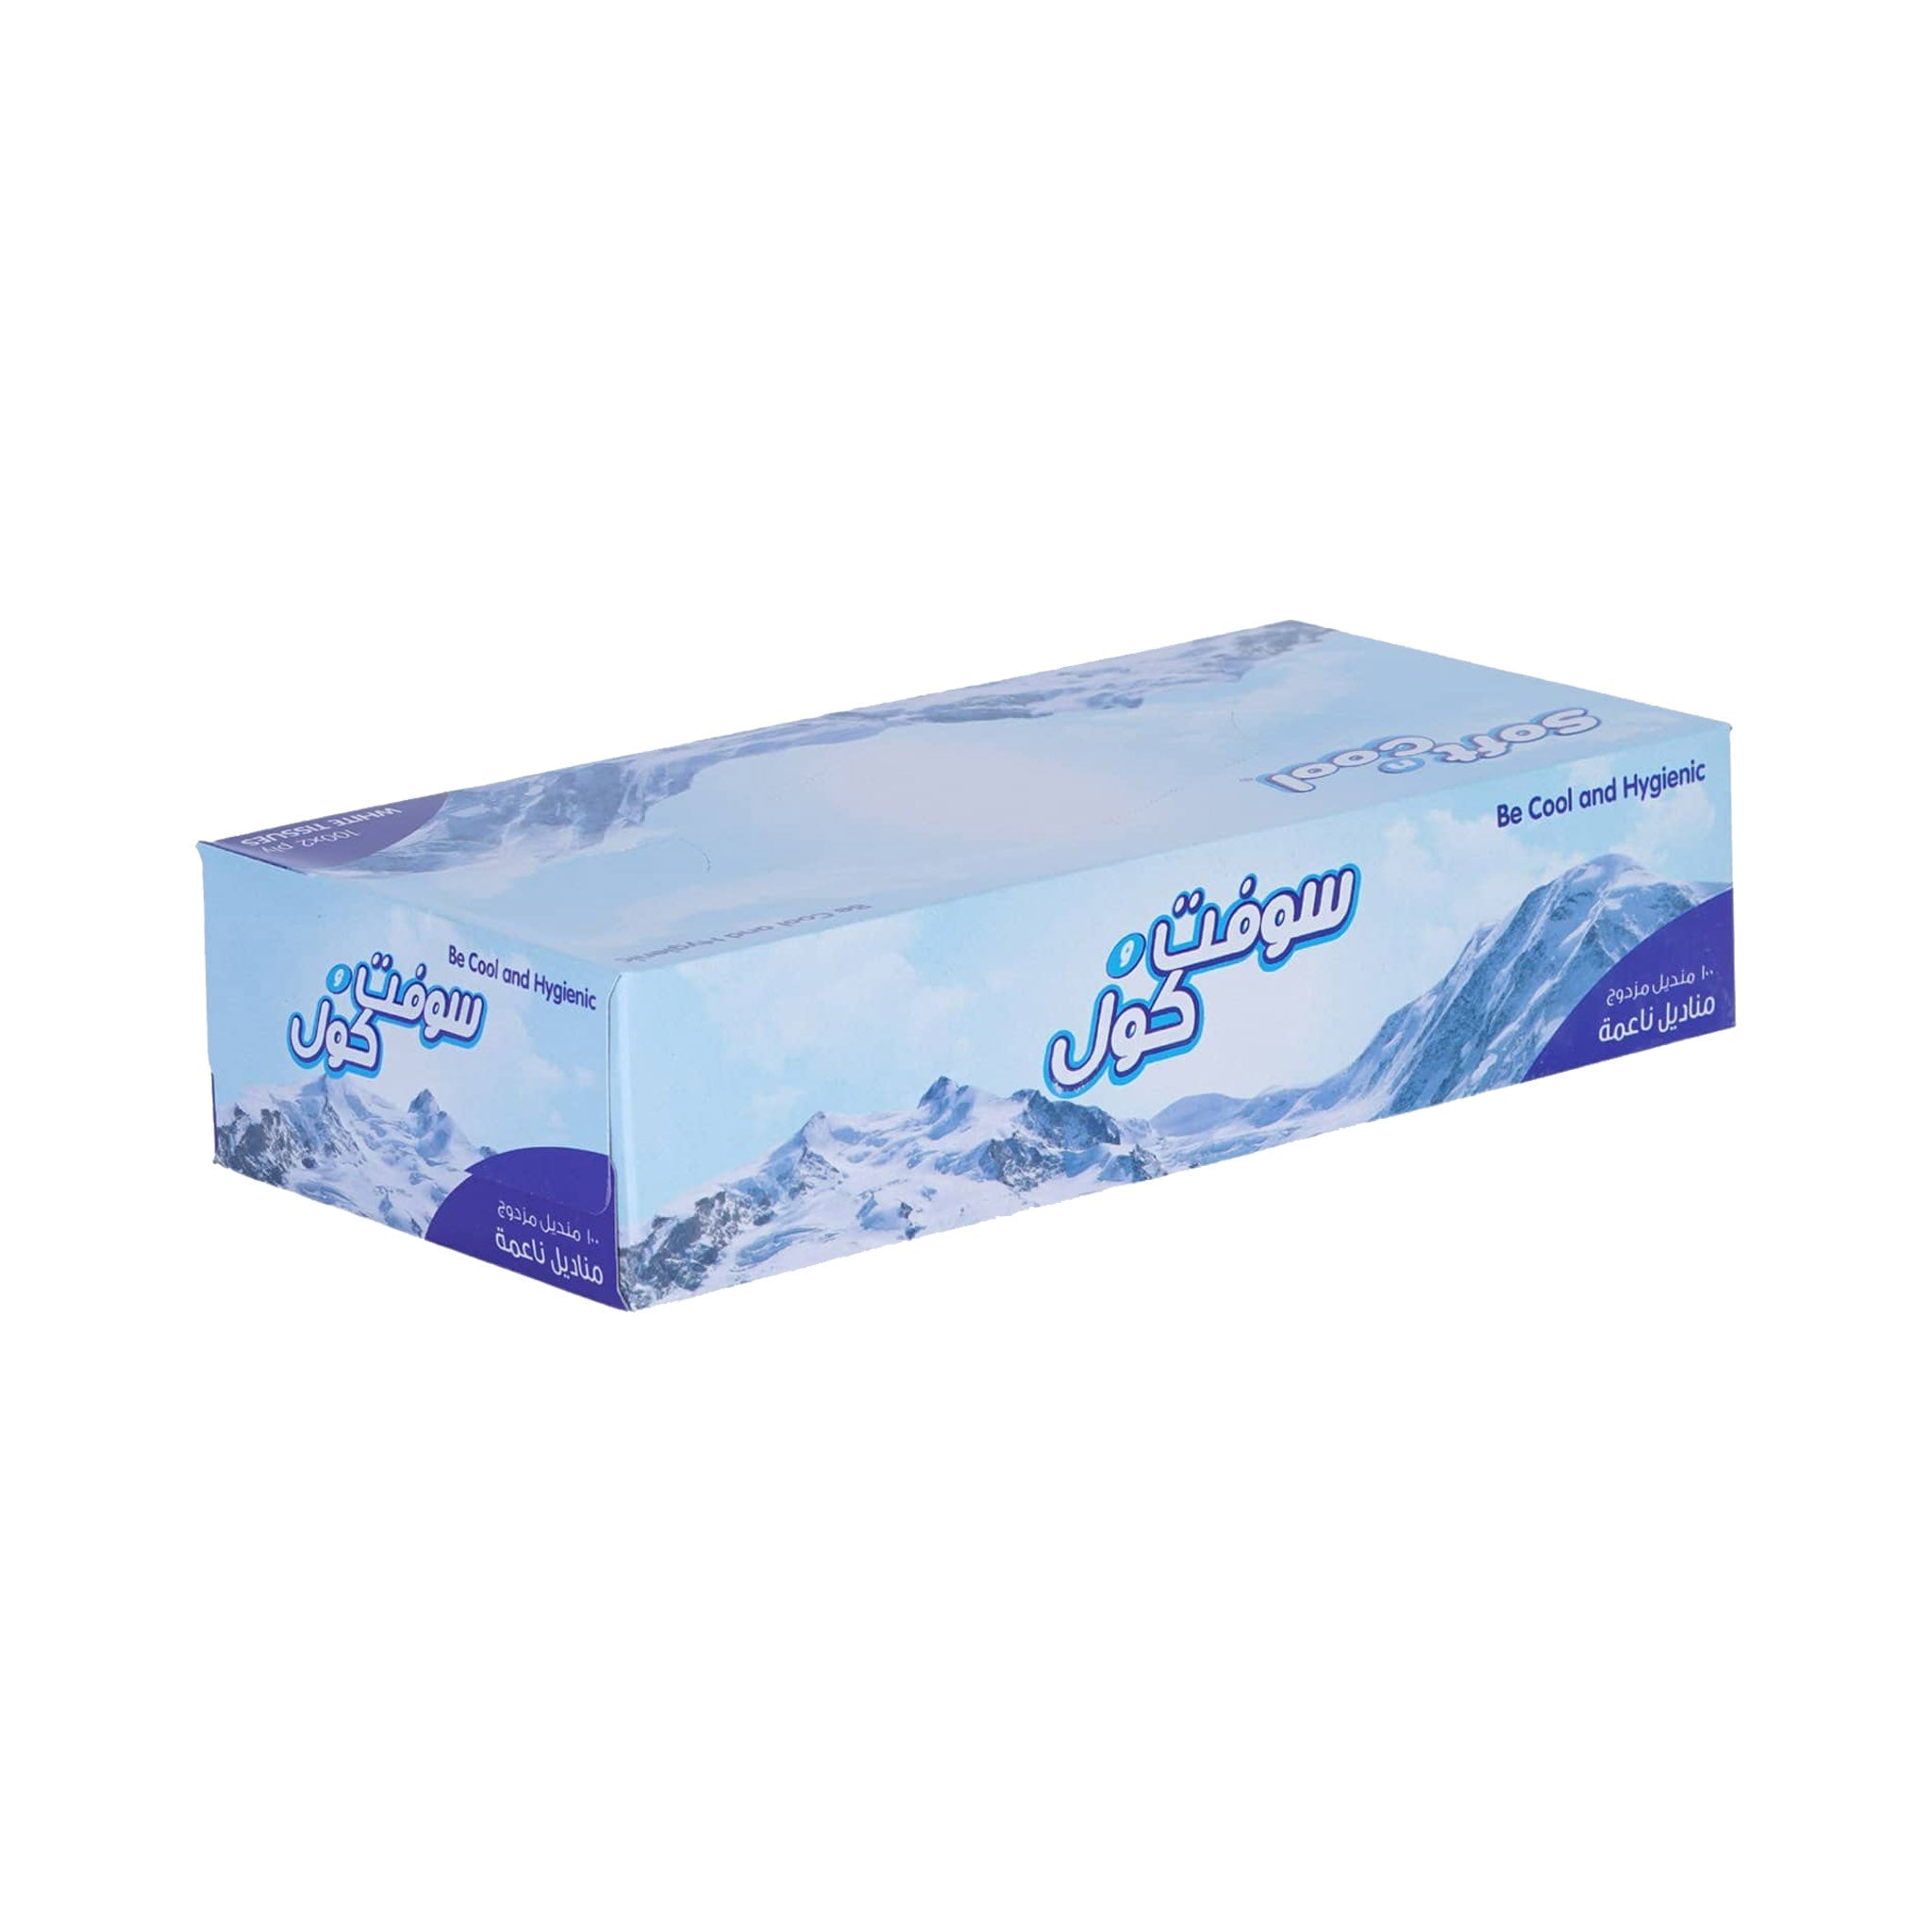 Soft N Cool Facial Tissue 100 Sheets X 2 Ply